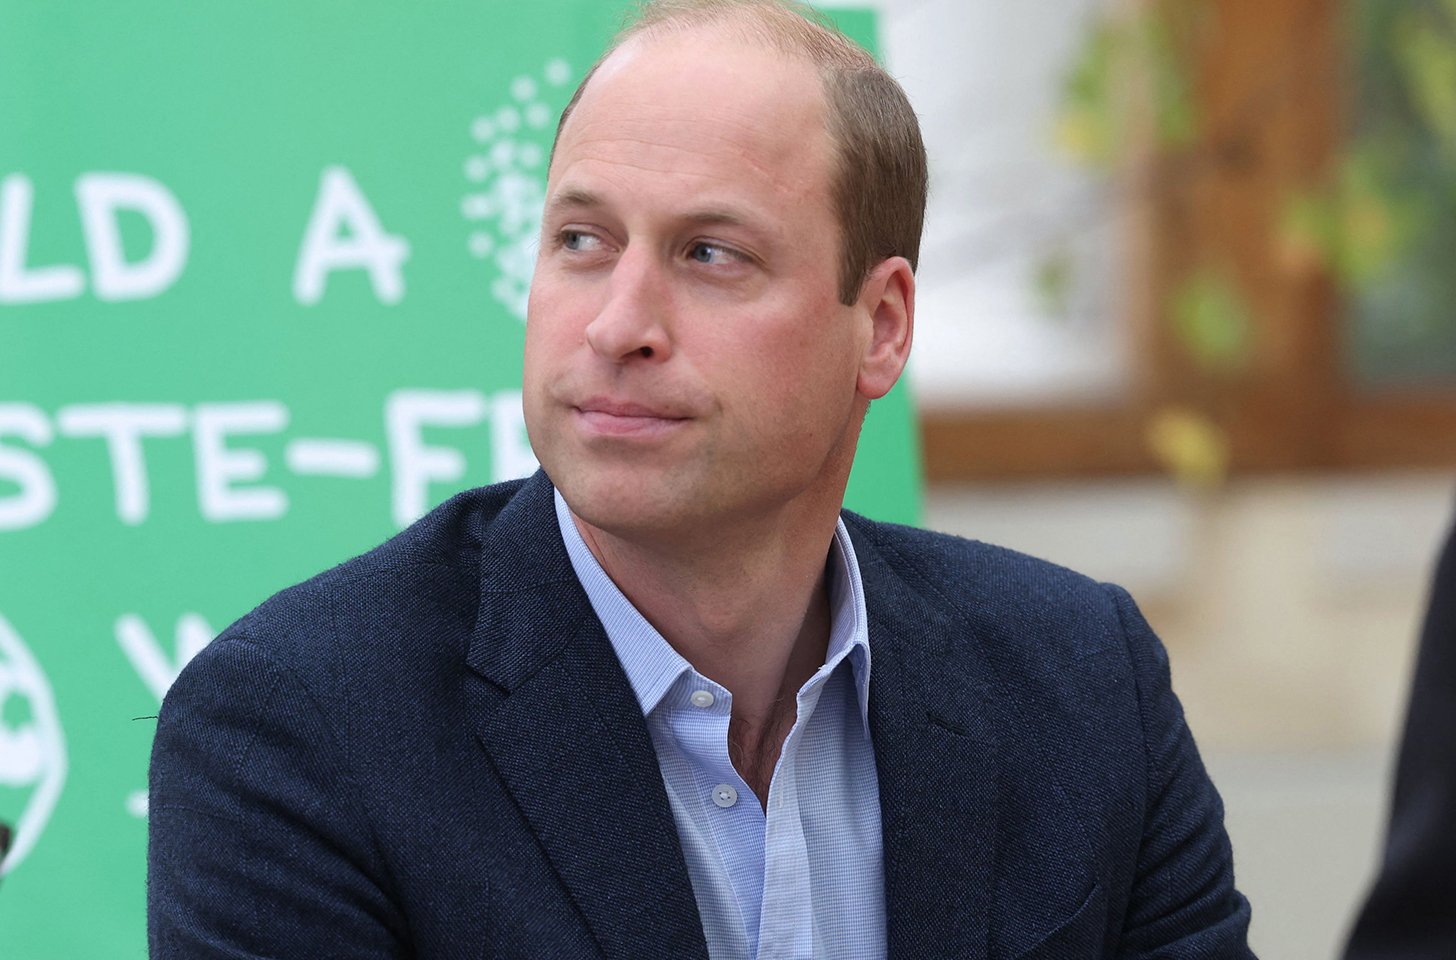 Prince William Pushed Back On This One Episode Of 'The Crown'